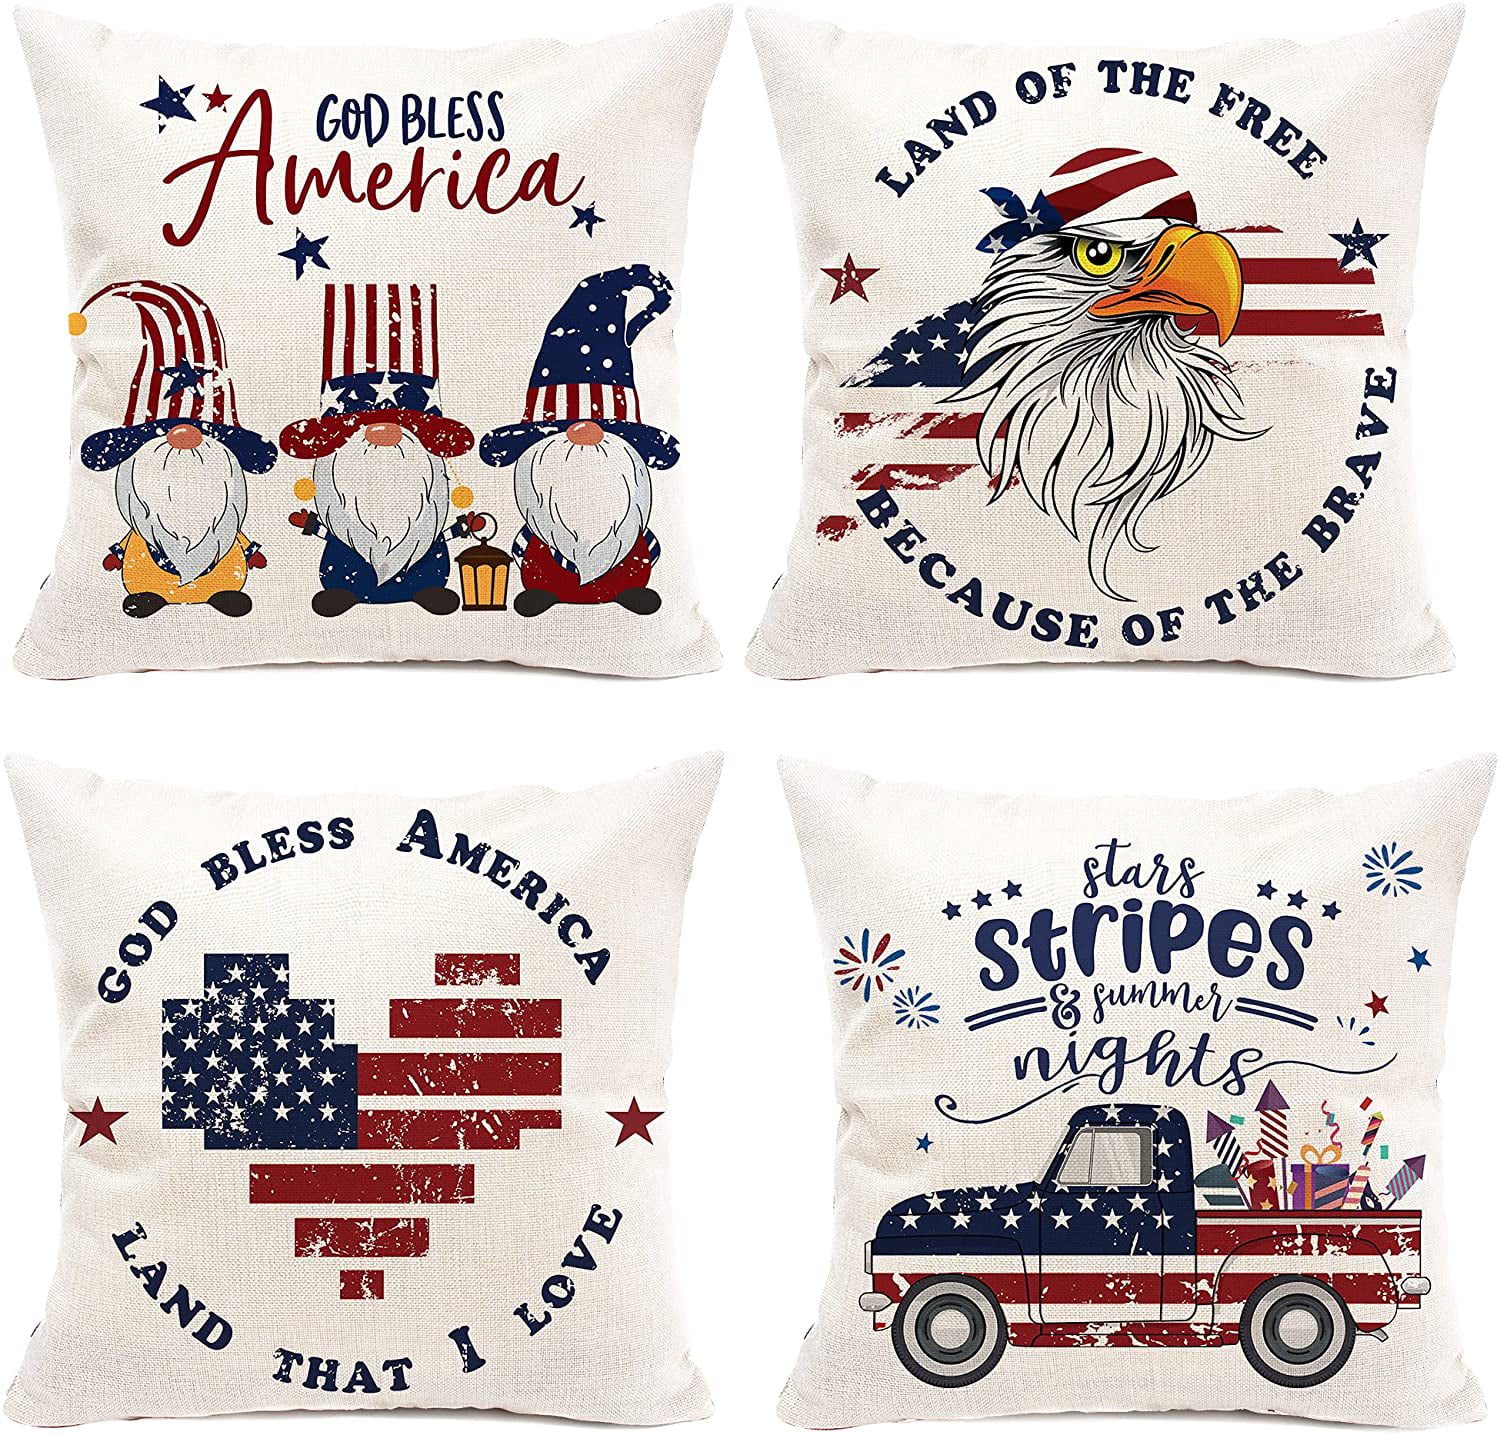 Multicolor 16x16 We The People Vintage Retro USA Flag Patriotic Freedom Throw Pillow